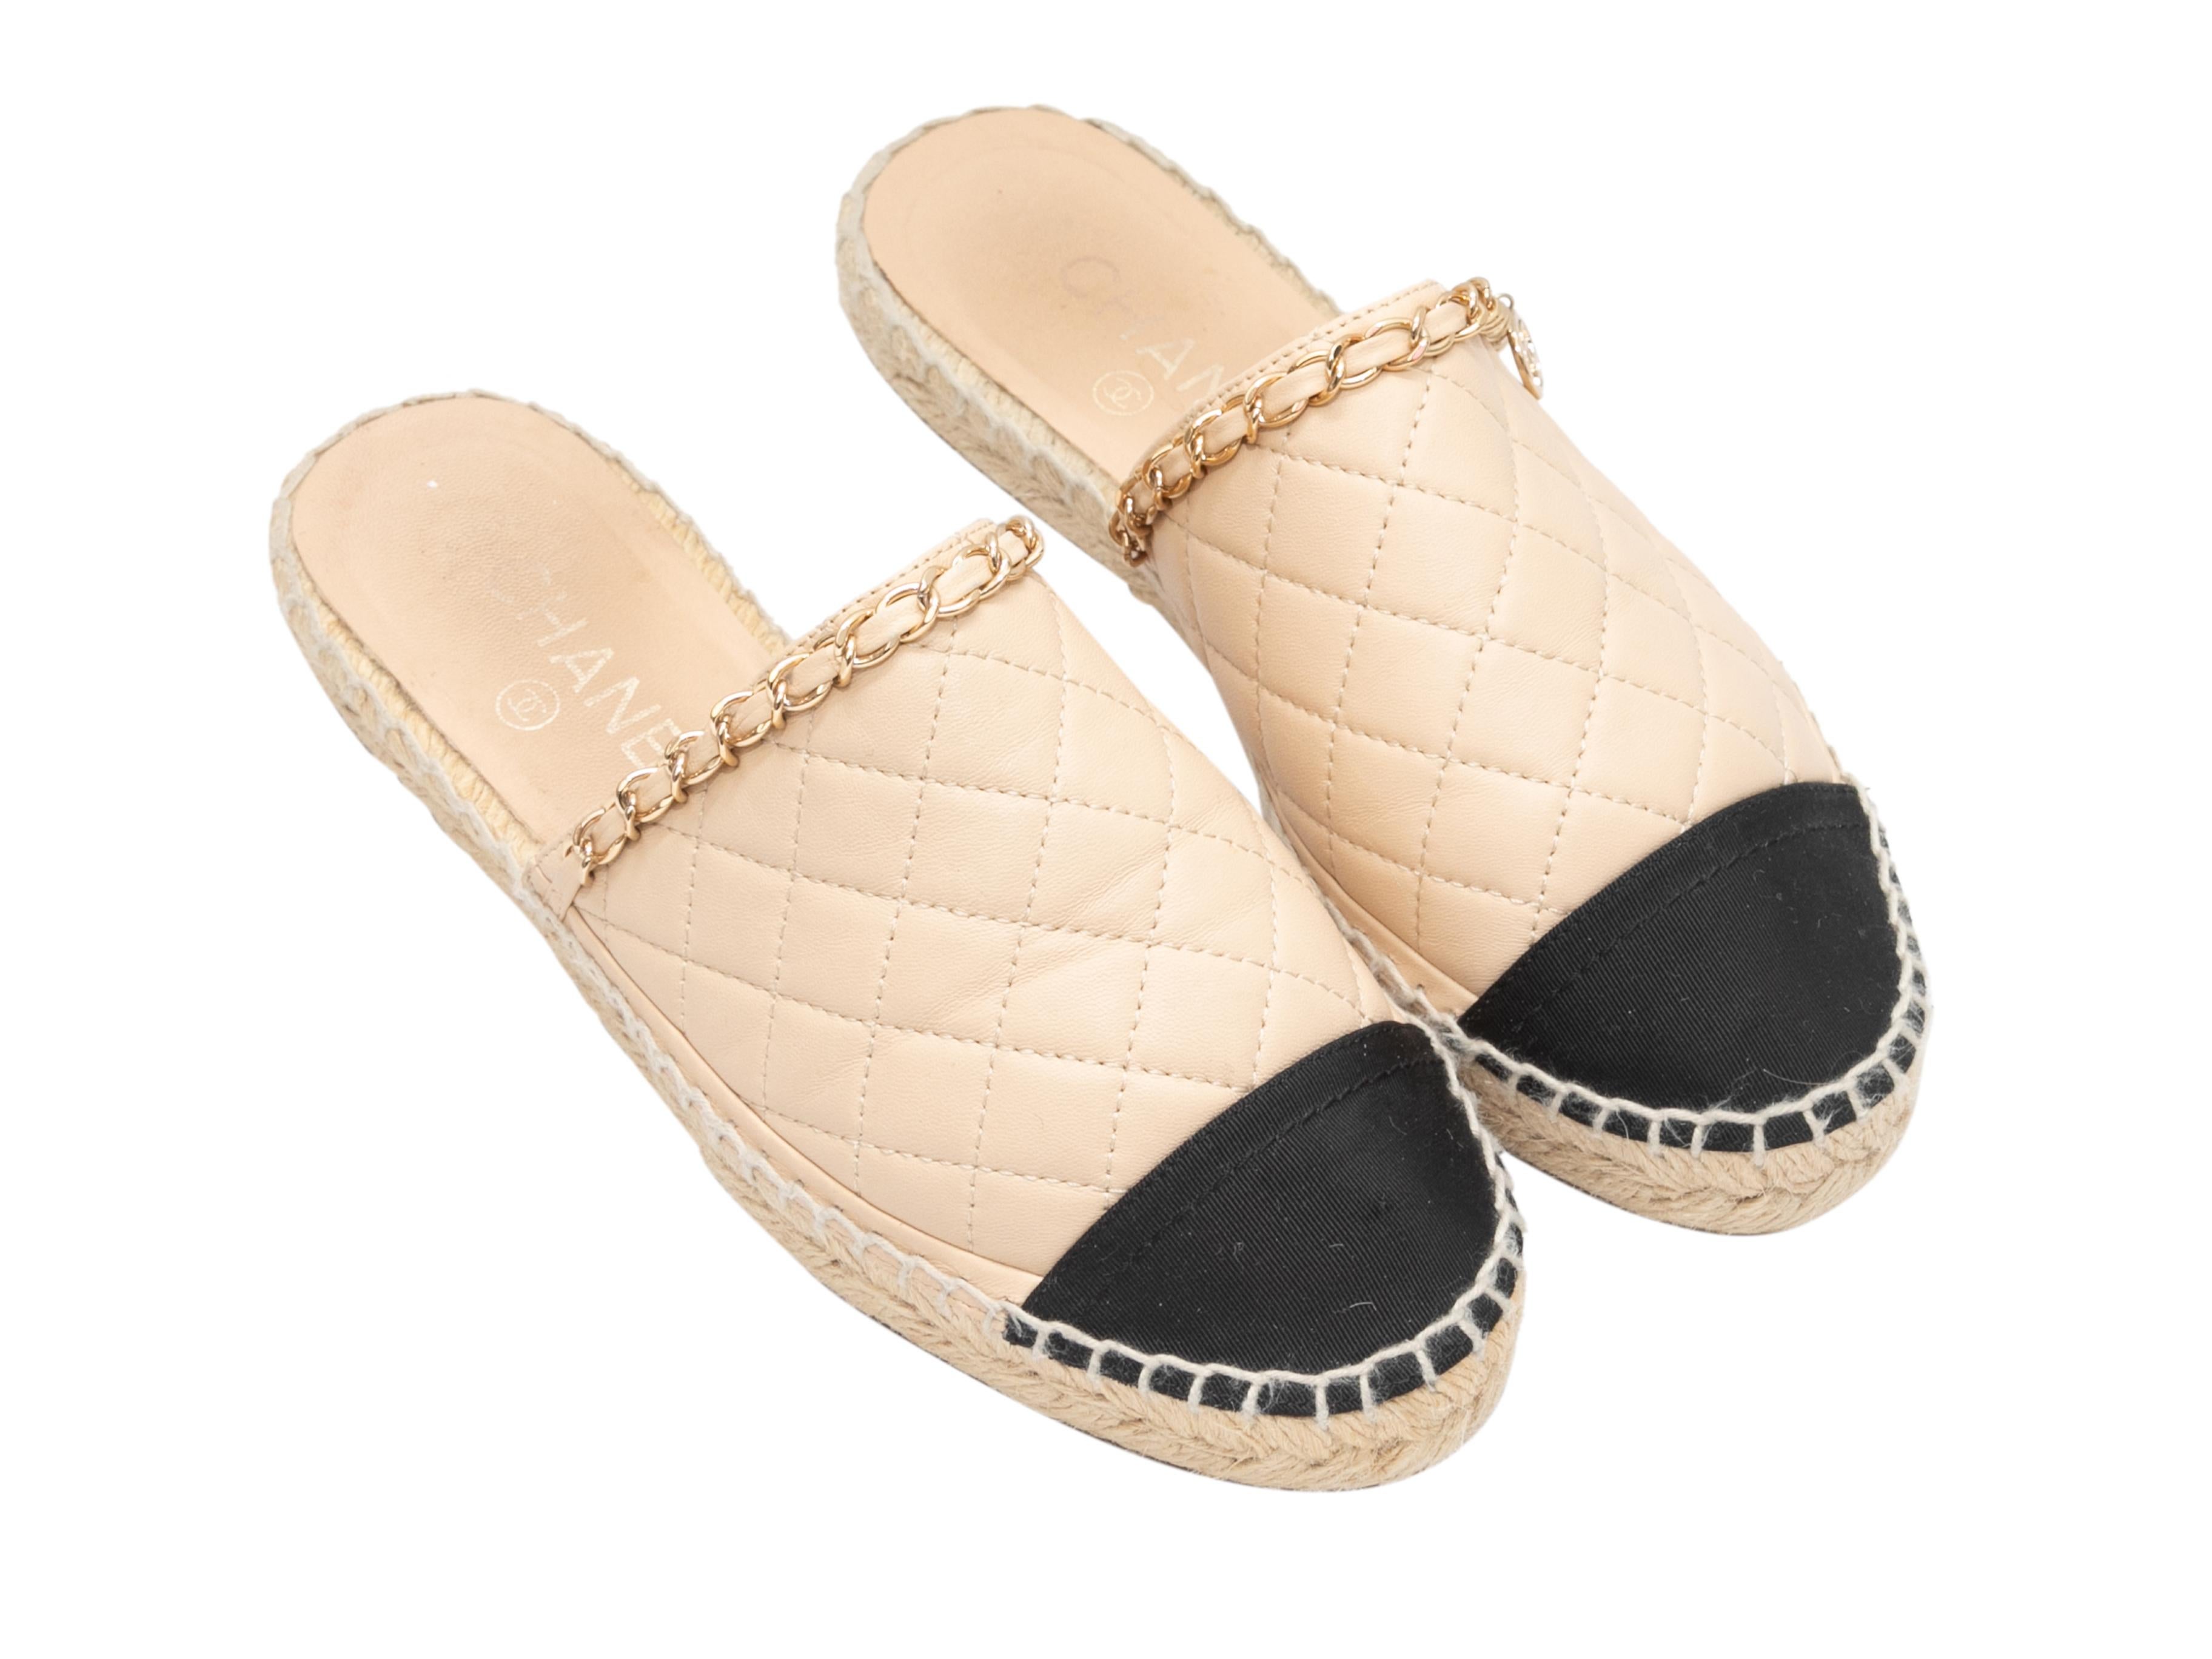 Tan quilted leather and black grosgrain cap-toe espadrille mules by Chanel. Gold-tone chain-link trim at tops. 1